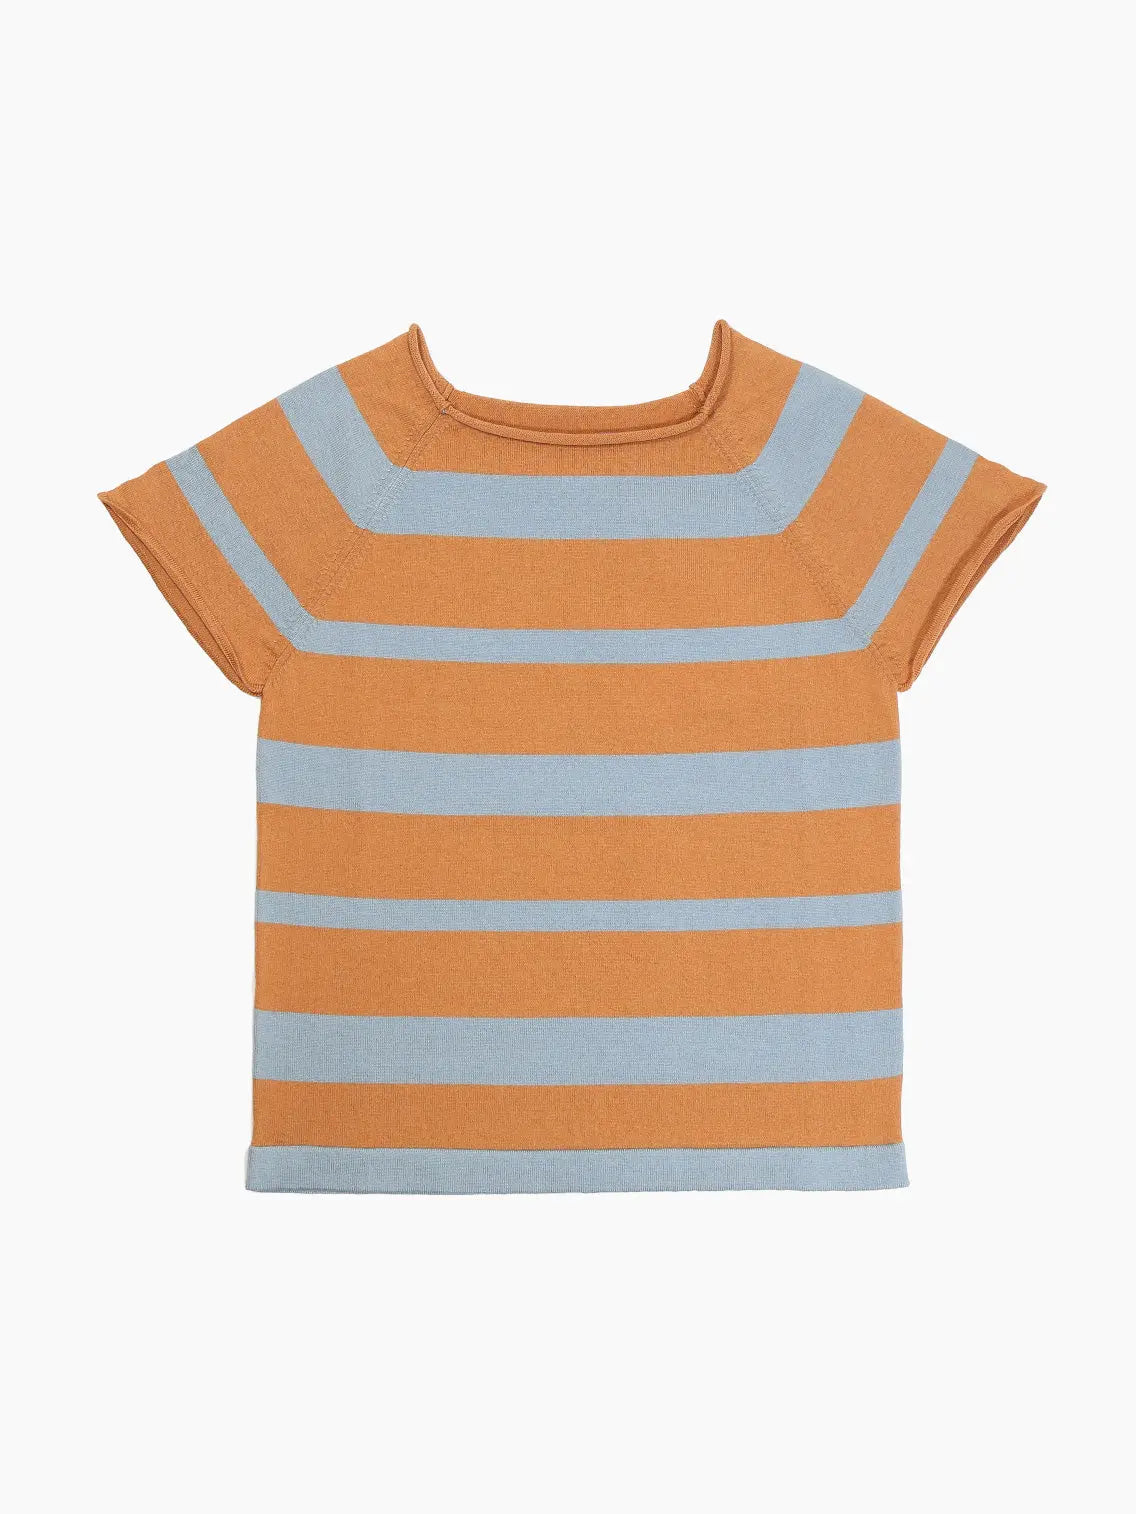 A short-sleeved, square-neck top featuring horizontal stripes in alternating burnt orange and light blue colors on a plain white background, available exclusively at Bassalstore in Barcelona. The product is the "Blow T-Shirt Tile/Sky" by Bielo.